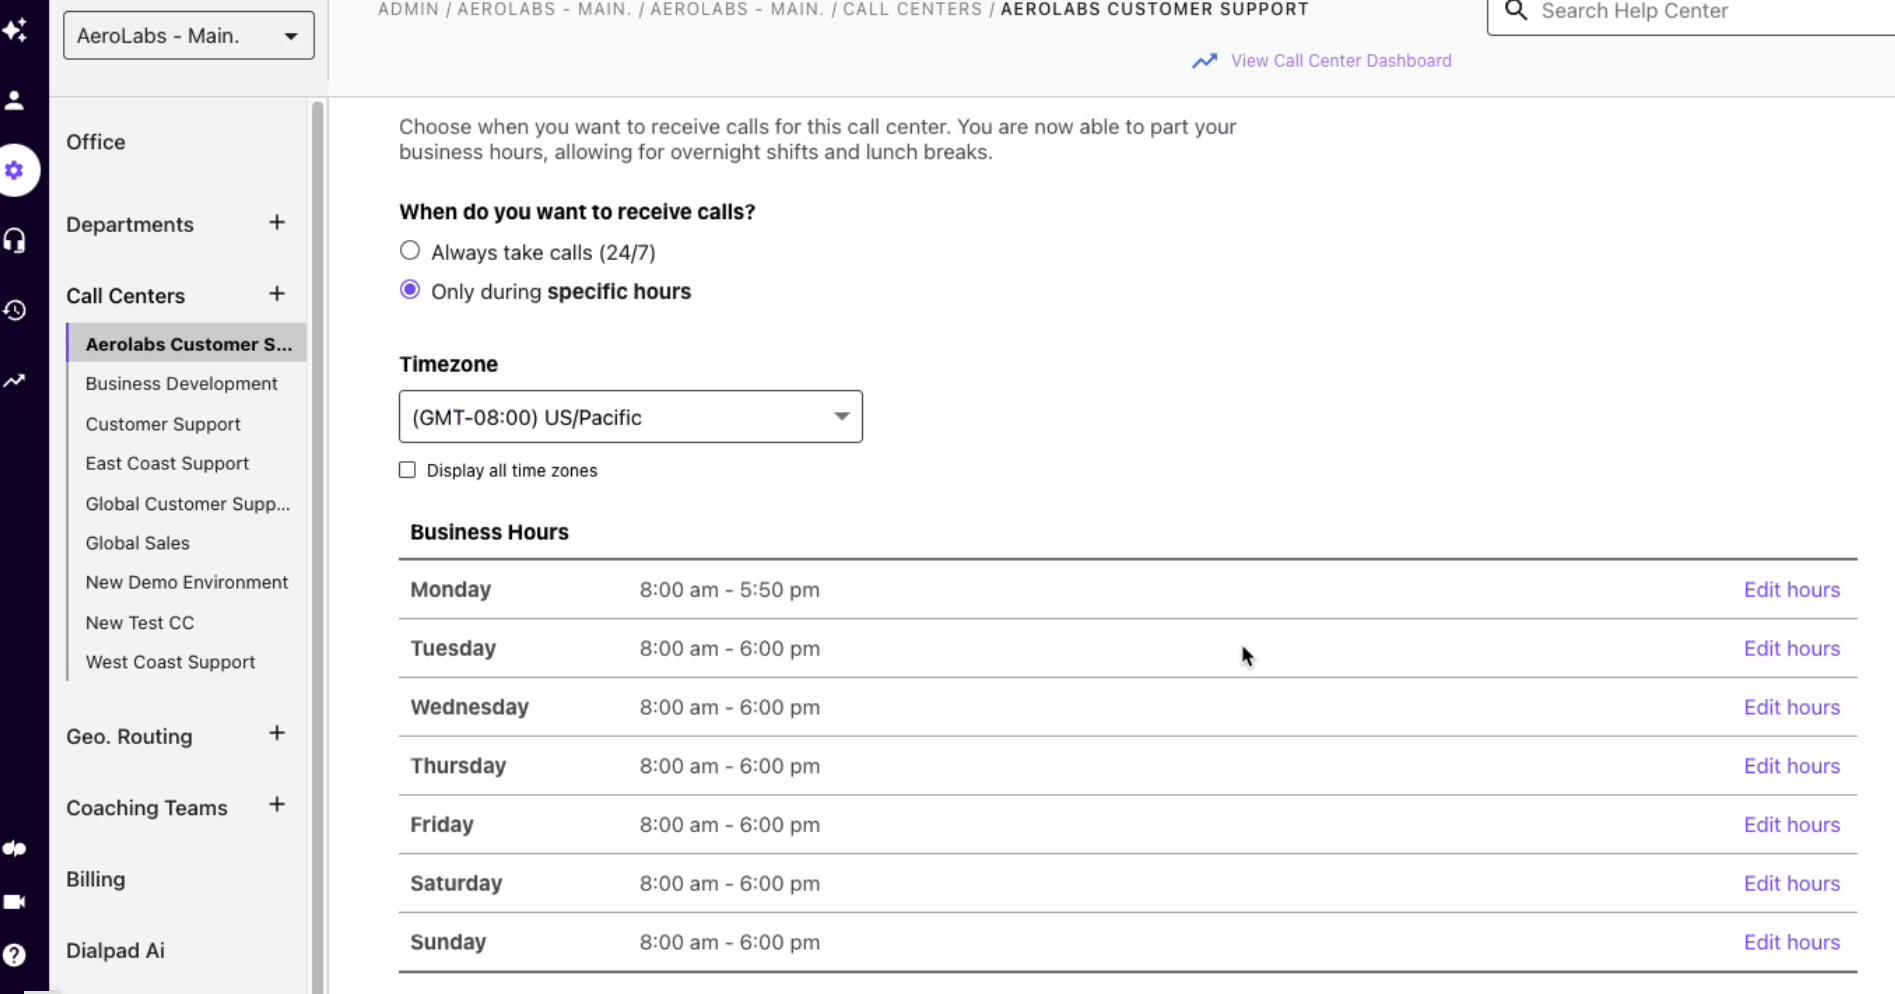 Dialpad call routing after hours